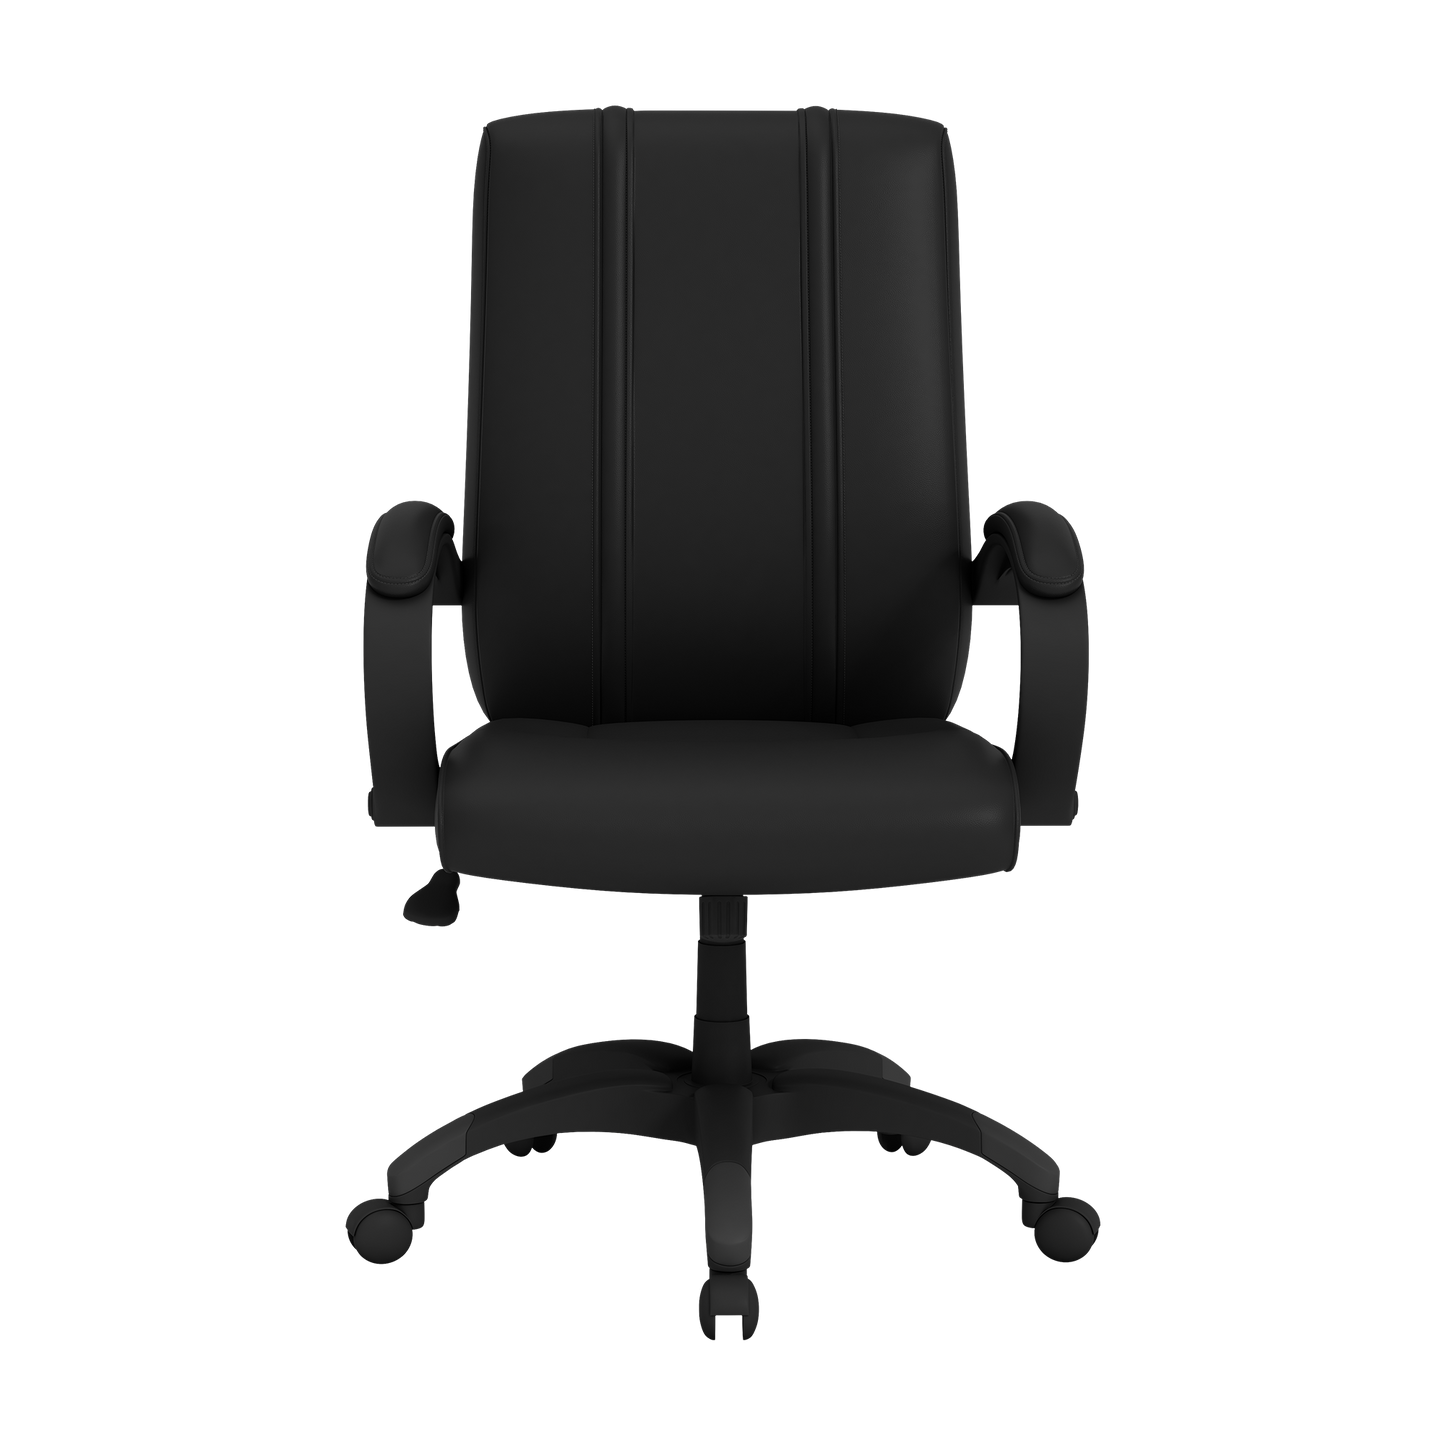 Office Chair 1000 with Vancouver Whitecaps FC Logo